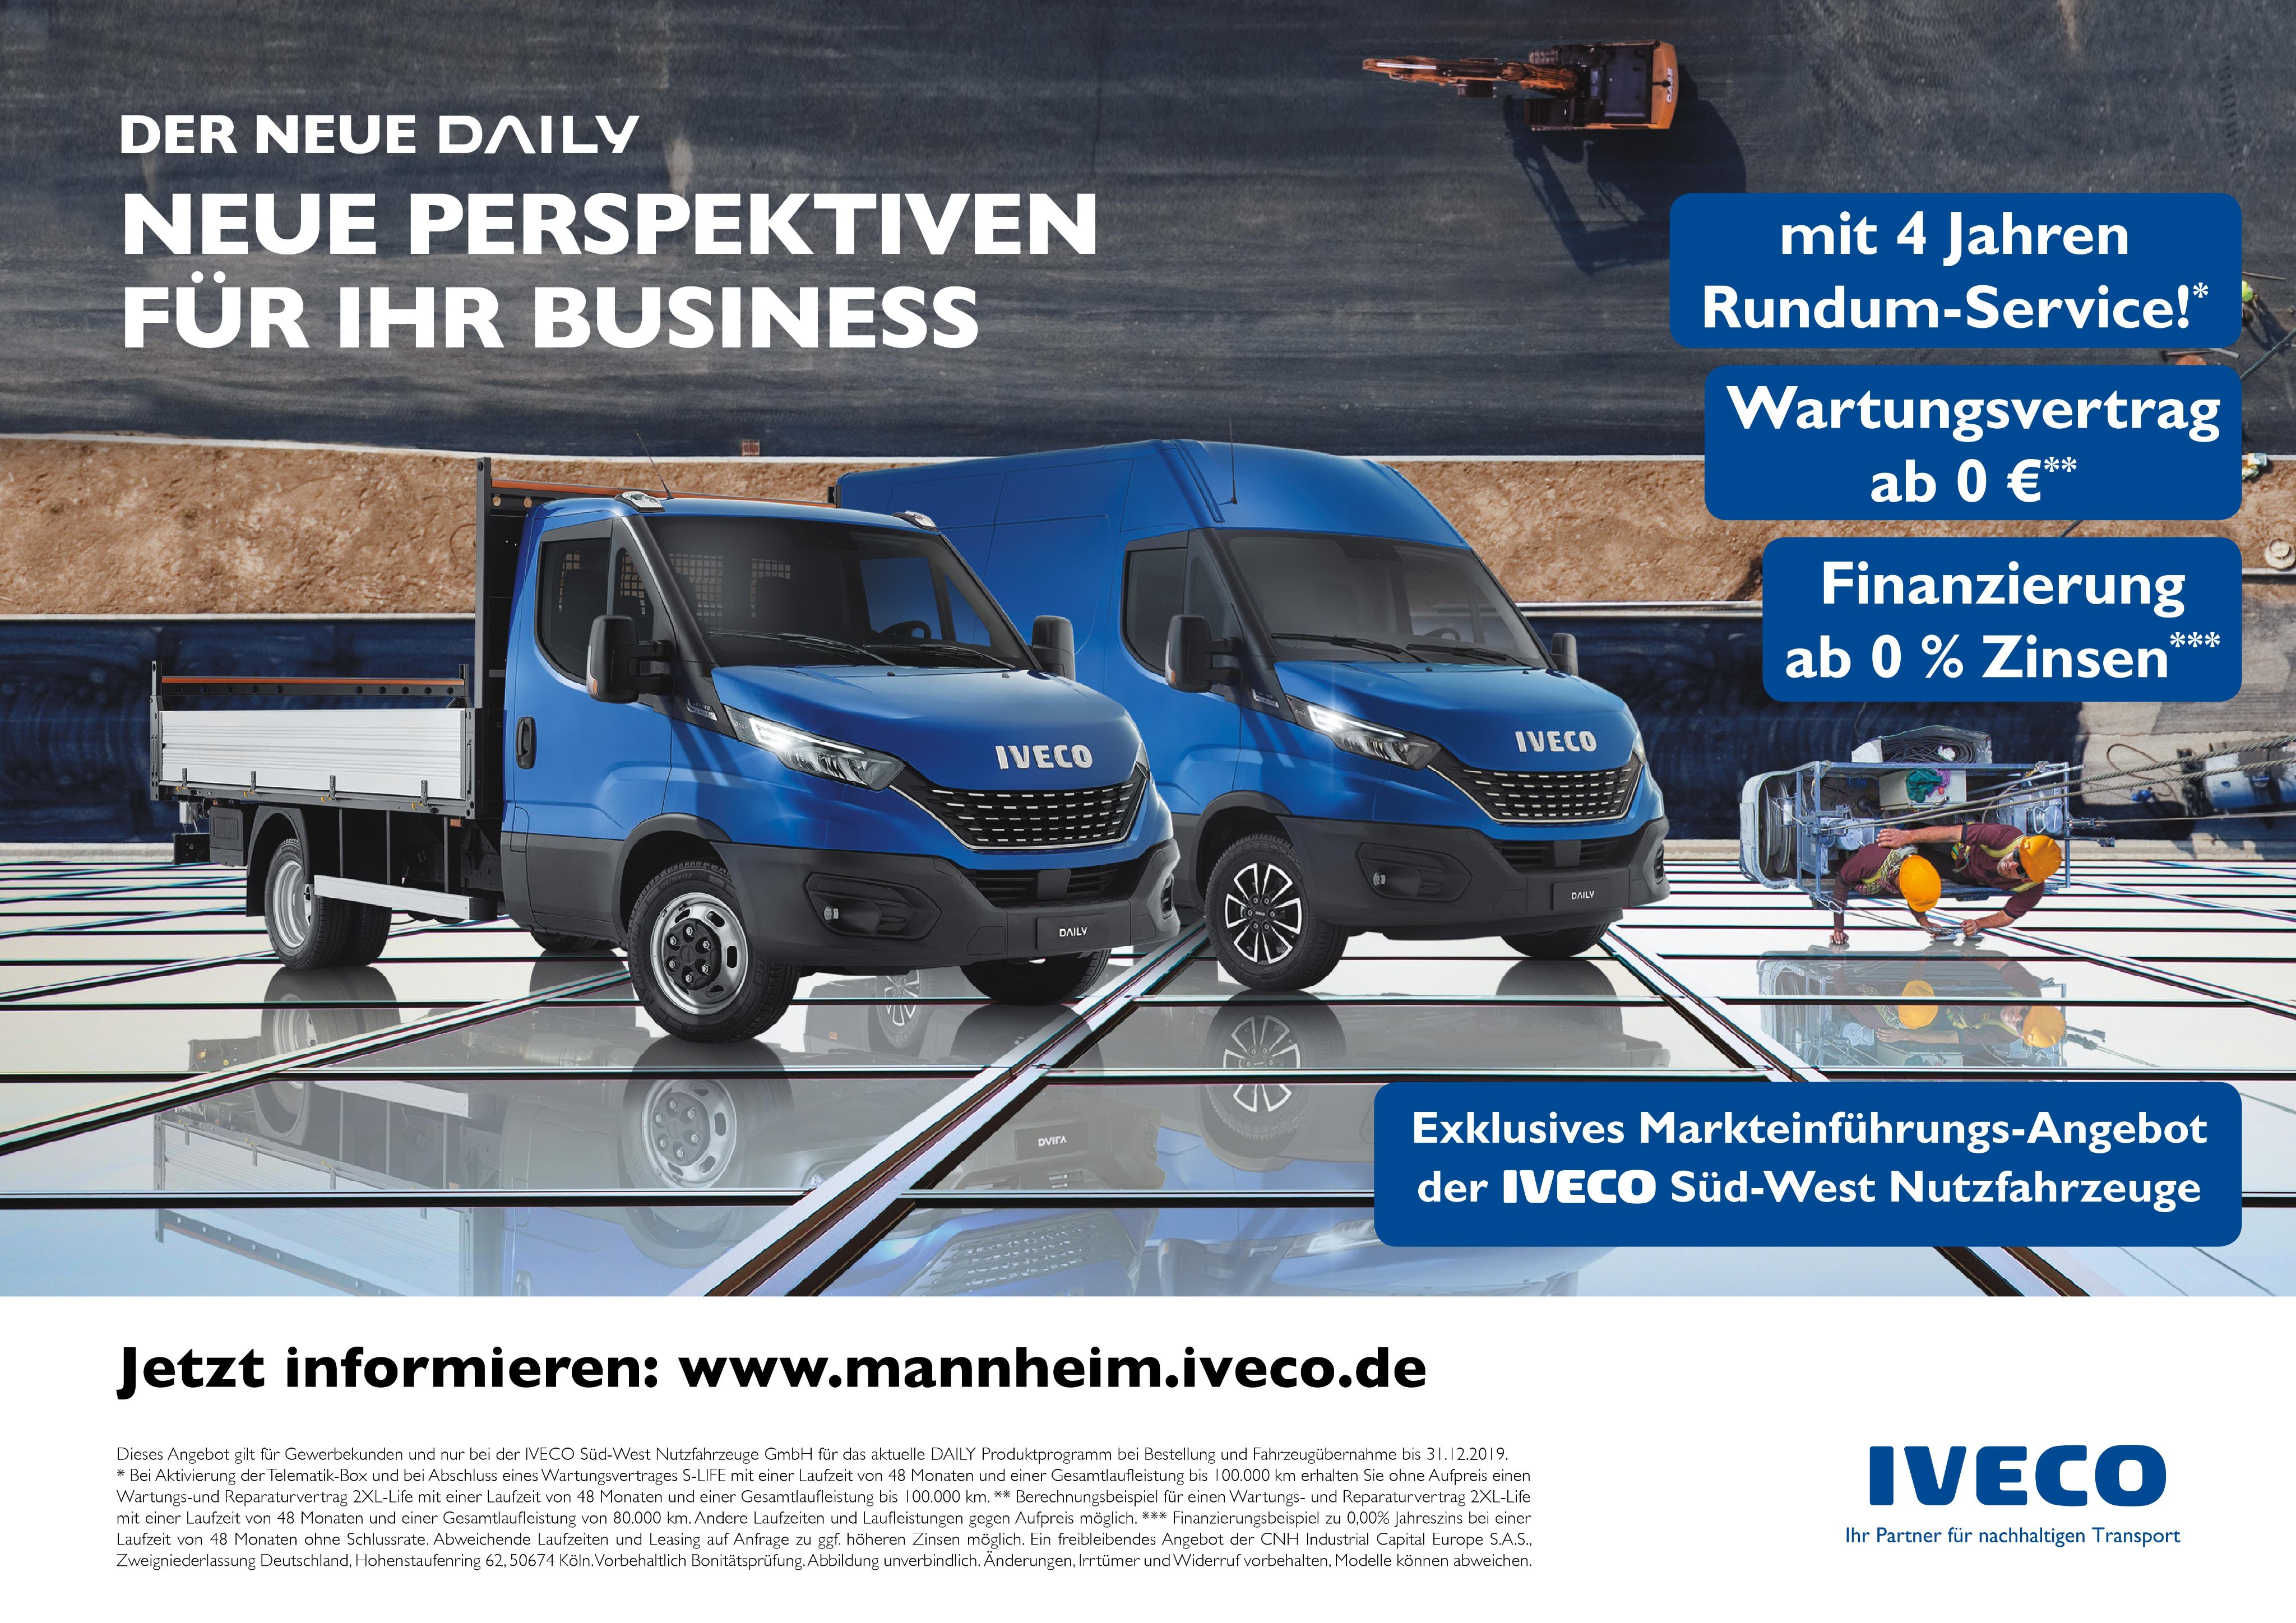 IVECO Süd-West (@IVECOsw) / Twitter